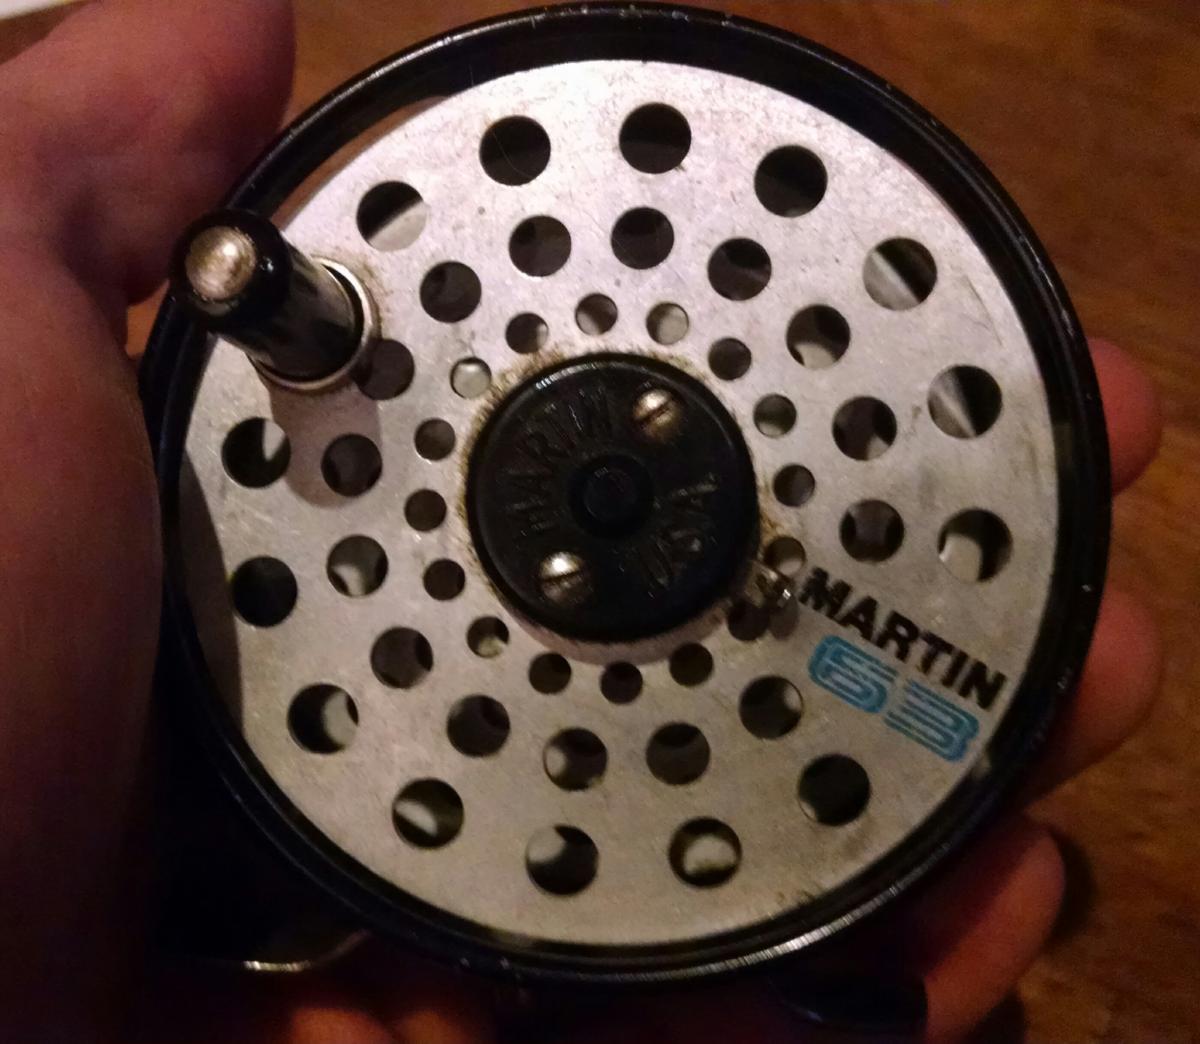 VINTAGE MARTIN FLY Reel Model 63 New in Box Old Stock with Papers Circa  1965 R69 $19.51 - PicClick